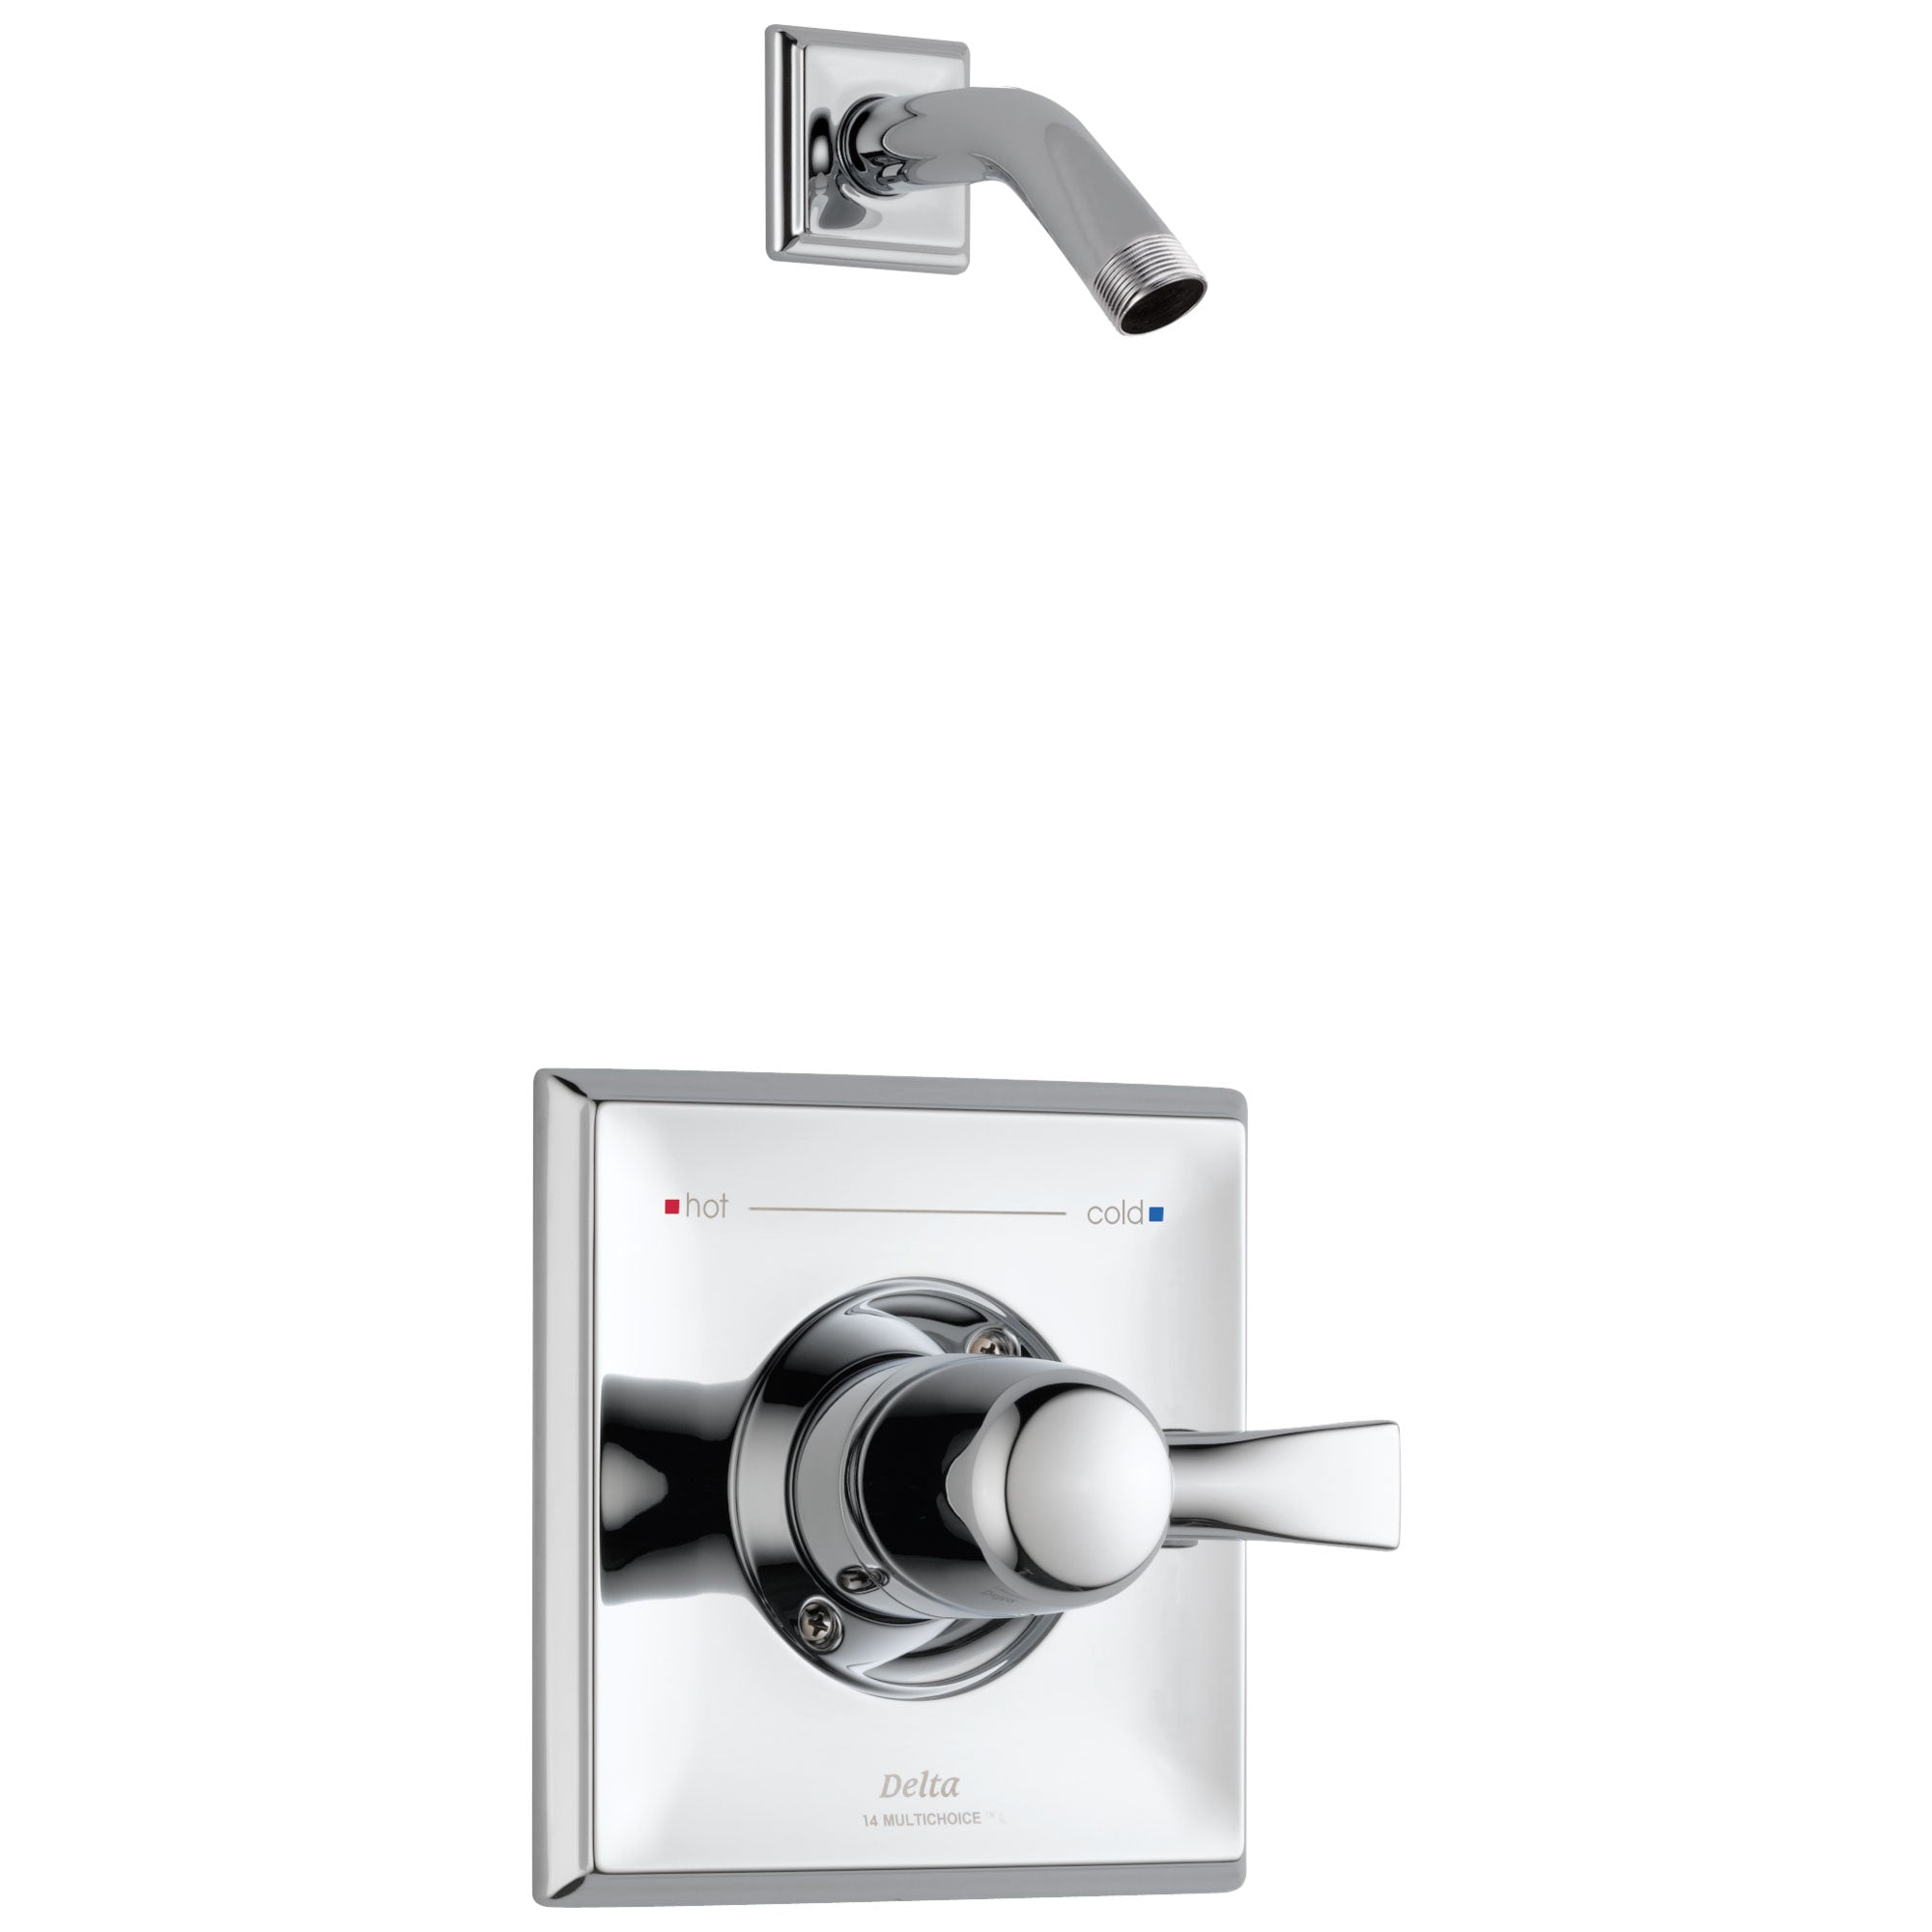 Delta Dryden Collection Chrome Finish Monitor 14 Series Stylish One Handle Shower only Faucet Trim Kit - Less Showerhead Includes Valve with Stops D2476V